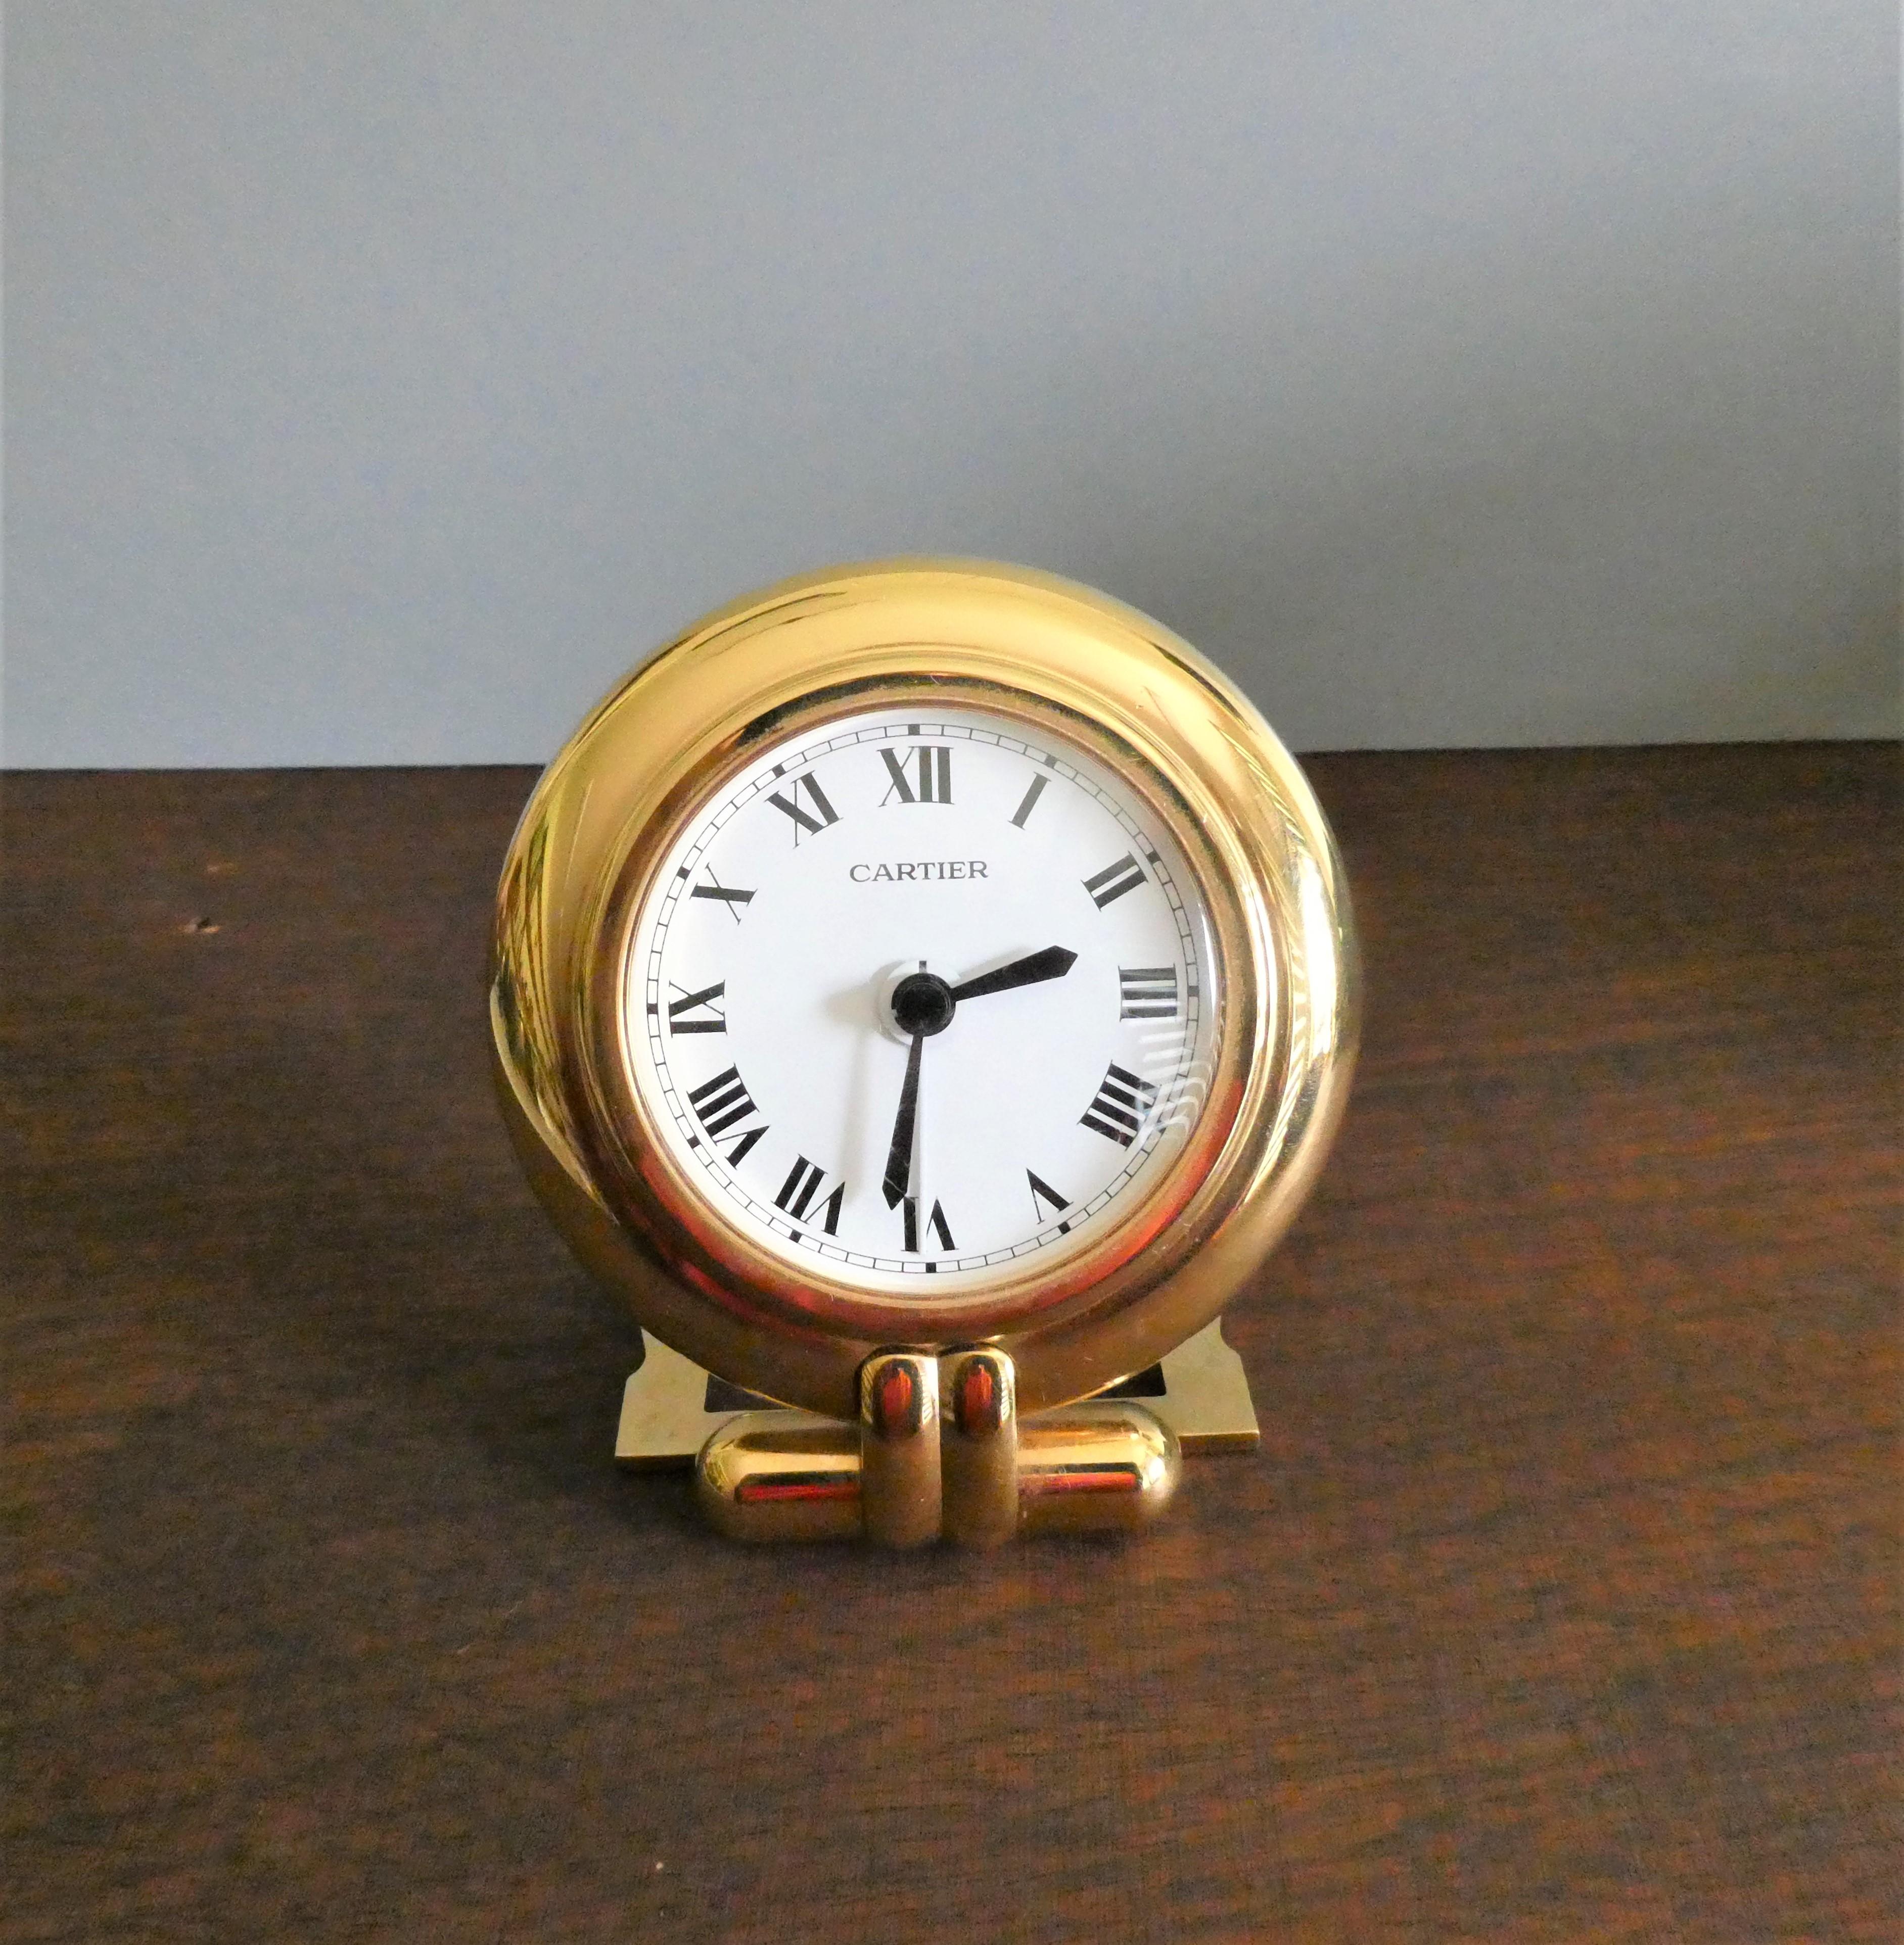 Travel Alarm Clock by Cartier

The clock housed in a round brass frame with decorative hinged strut support.

Painted dial with Roman numerals, original hands and alarm hand signed ‘Cartier’.

Anodised strut frame supported by two iconic ‘C’